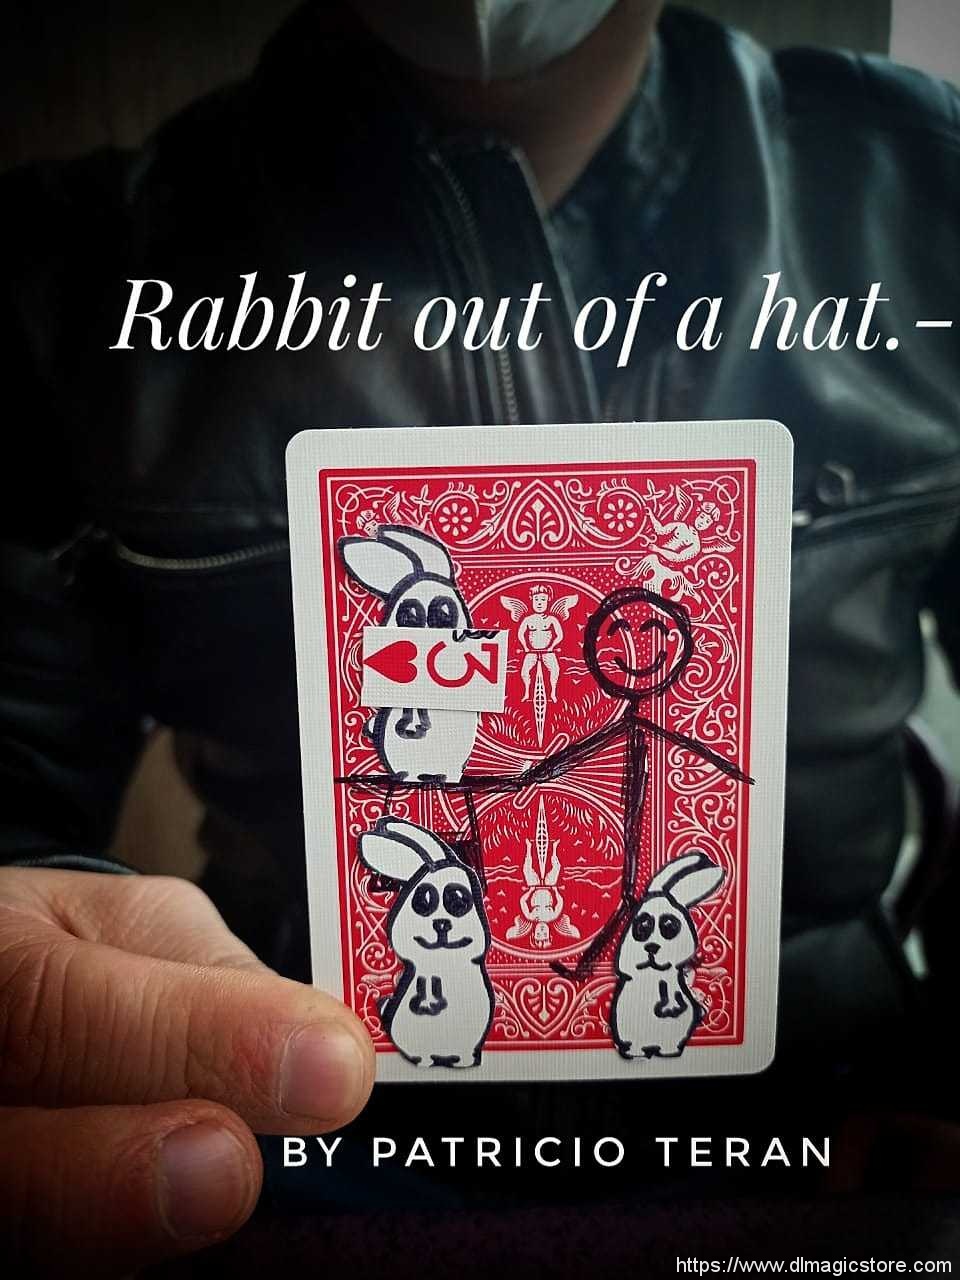 RABBIT OUT OF A HAT BY PATRICIO TERAN (Instant Download)